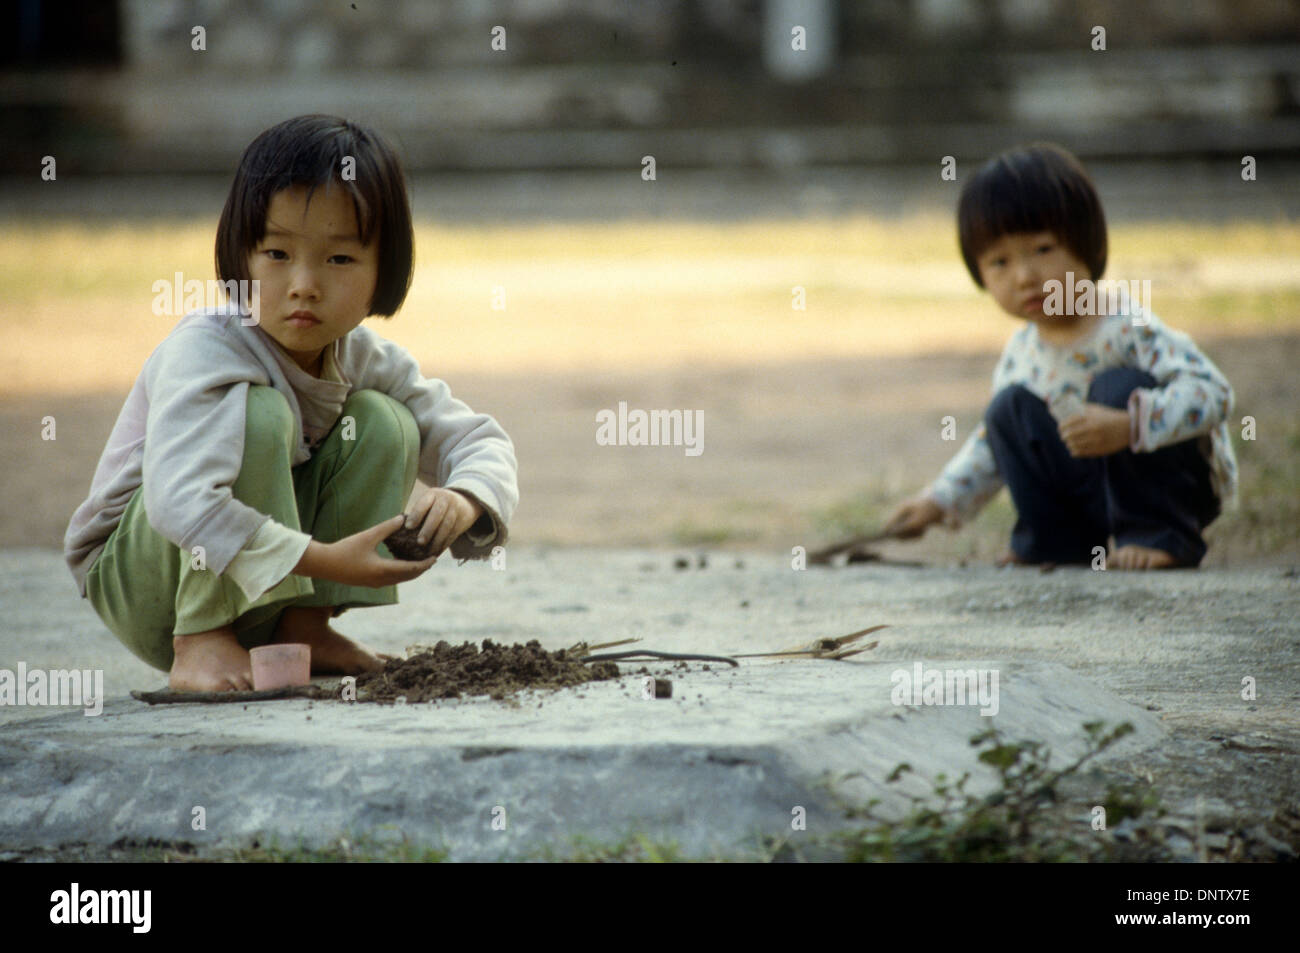 Two little girls playing in a playground in Guangzhou, China Stock Photo